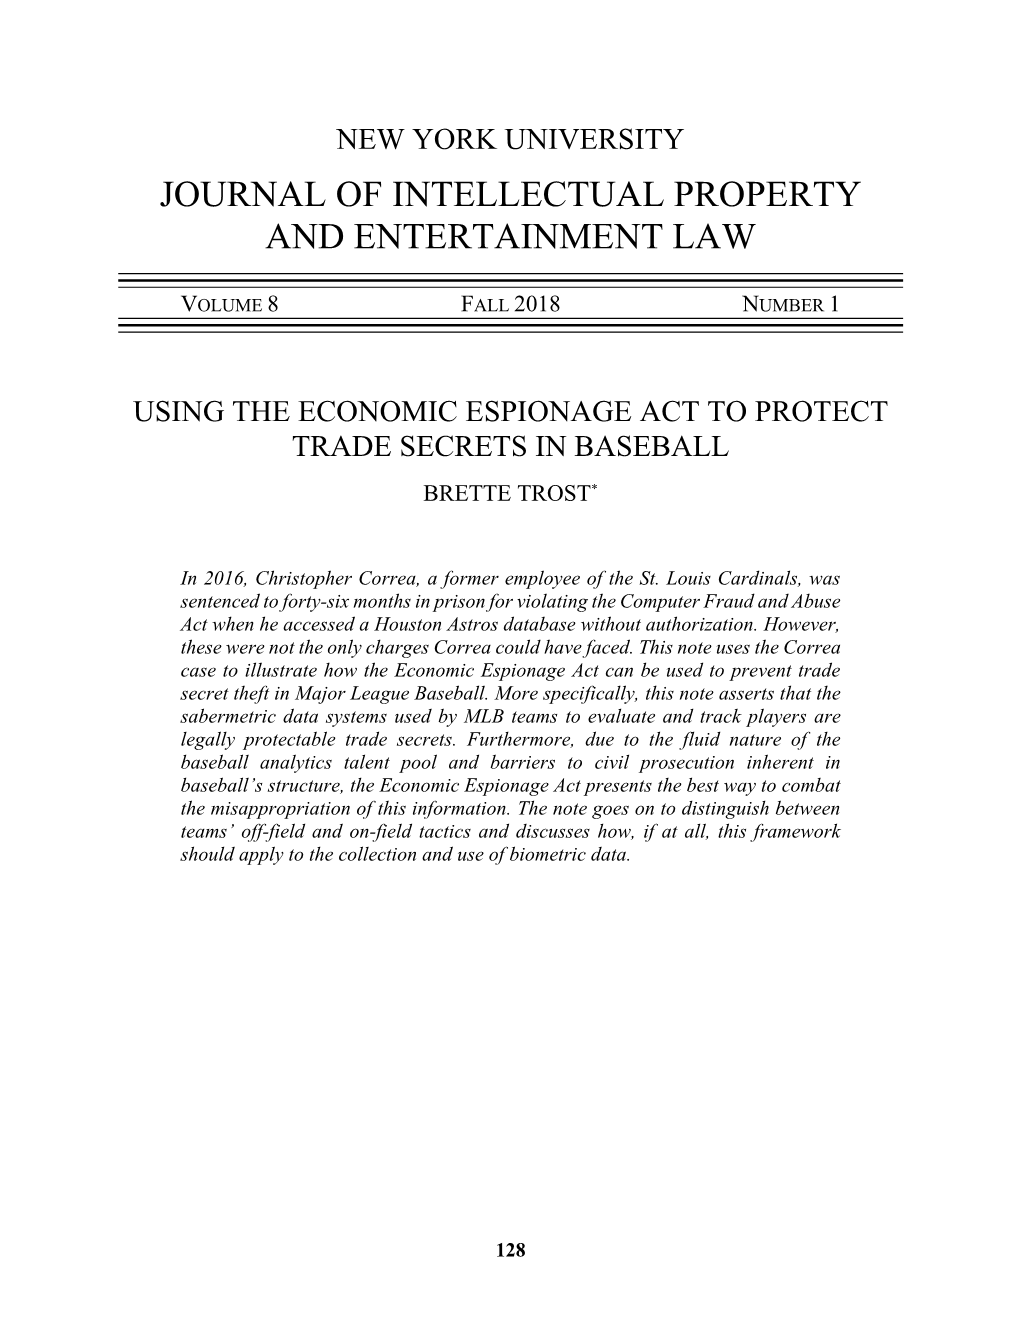 Journal of Intellectual Property and Entertainment Law